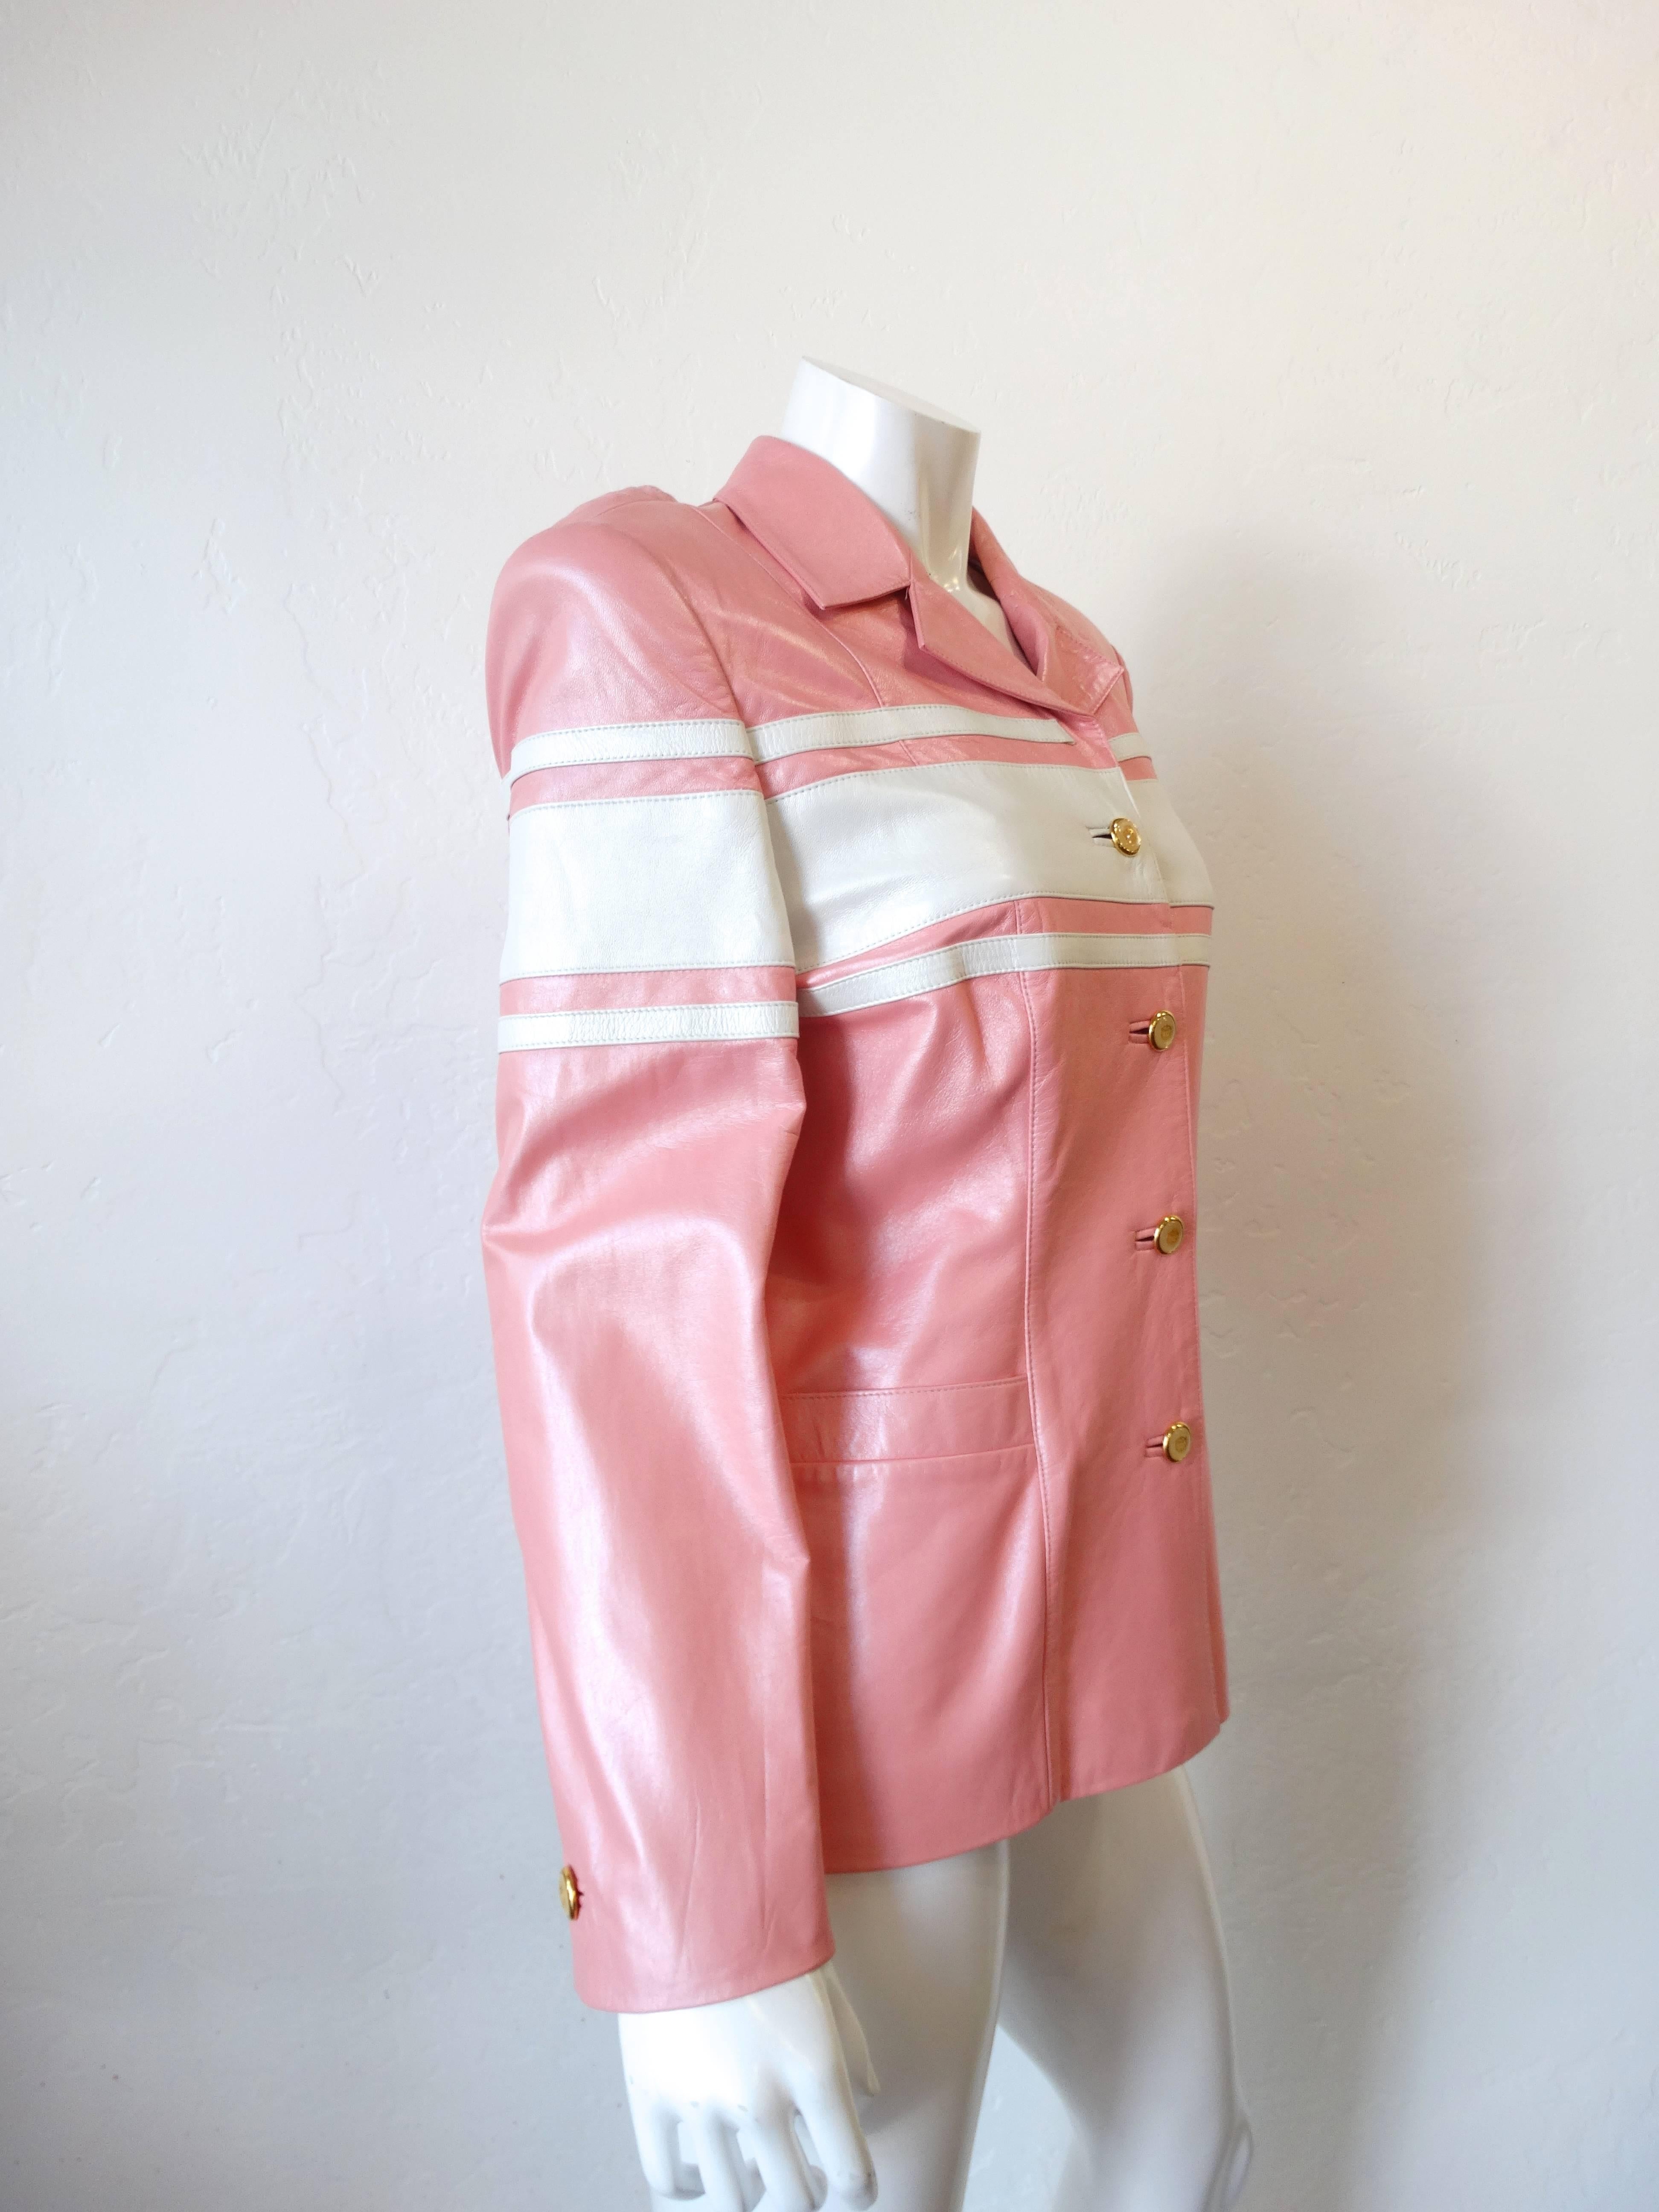 1980s Escada racing stripe jacket! Made of soft baby pink leather accented with white racing stripes. Gold metal and enamel emblem buttons up the front. Fully lined satin interior with kiss mark print! Marked a size 40. 